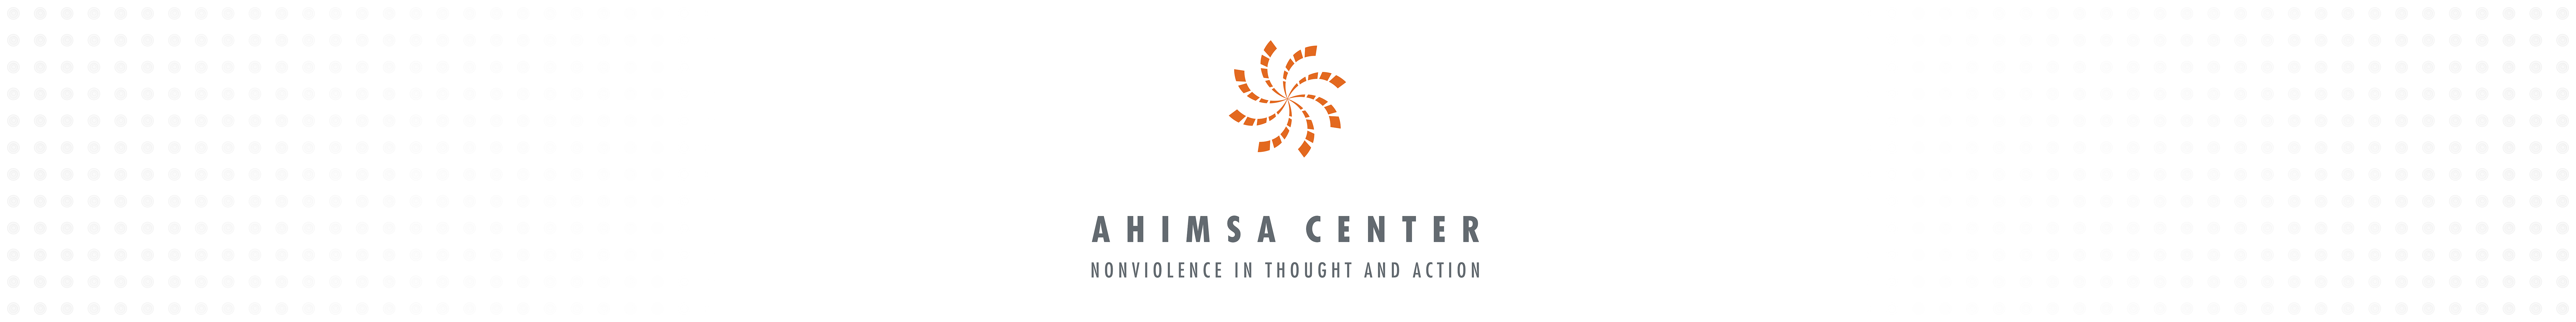 AHIMSA CENTER NONVIOLENCE IN THOUGHT AND ACTION